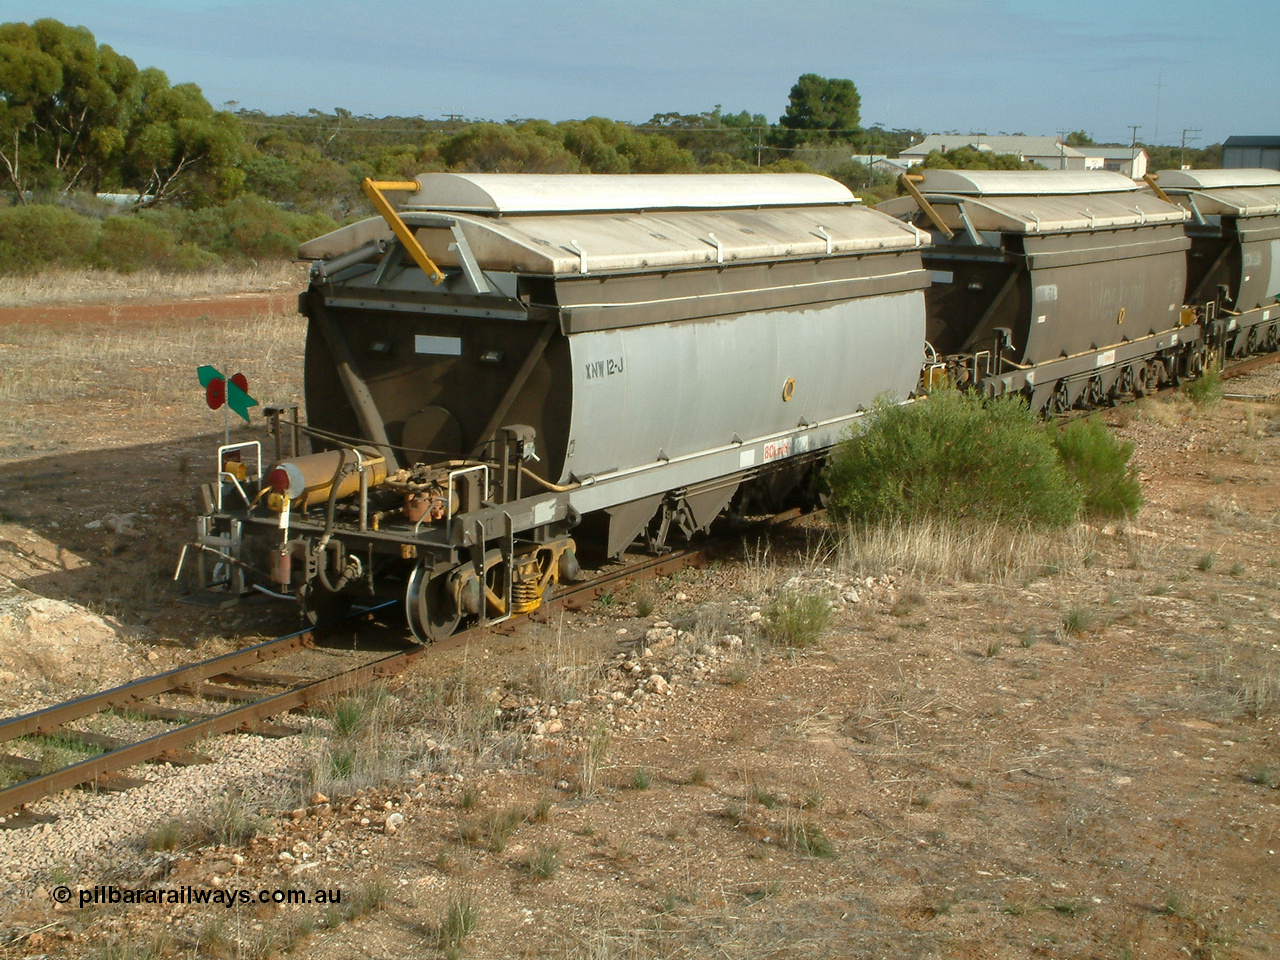 030409 084713
Kyancutta, XNW type bogie grain hopper waggon XNW 12 on the rear of a string of twelve such waggons, Comeng Qld built XNG type bogie waggon for Norseman Goldmines NL, then WAGR owned and coded XNA then in 1994 converted to XNW grain waggons. They arrived on the Eyre Peninsula system from 2001.
Keywords: XNW-type;XNW12;Comeng-Qld;XNG-type;XNA-type;